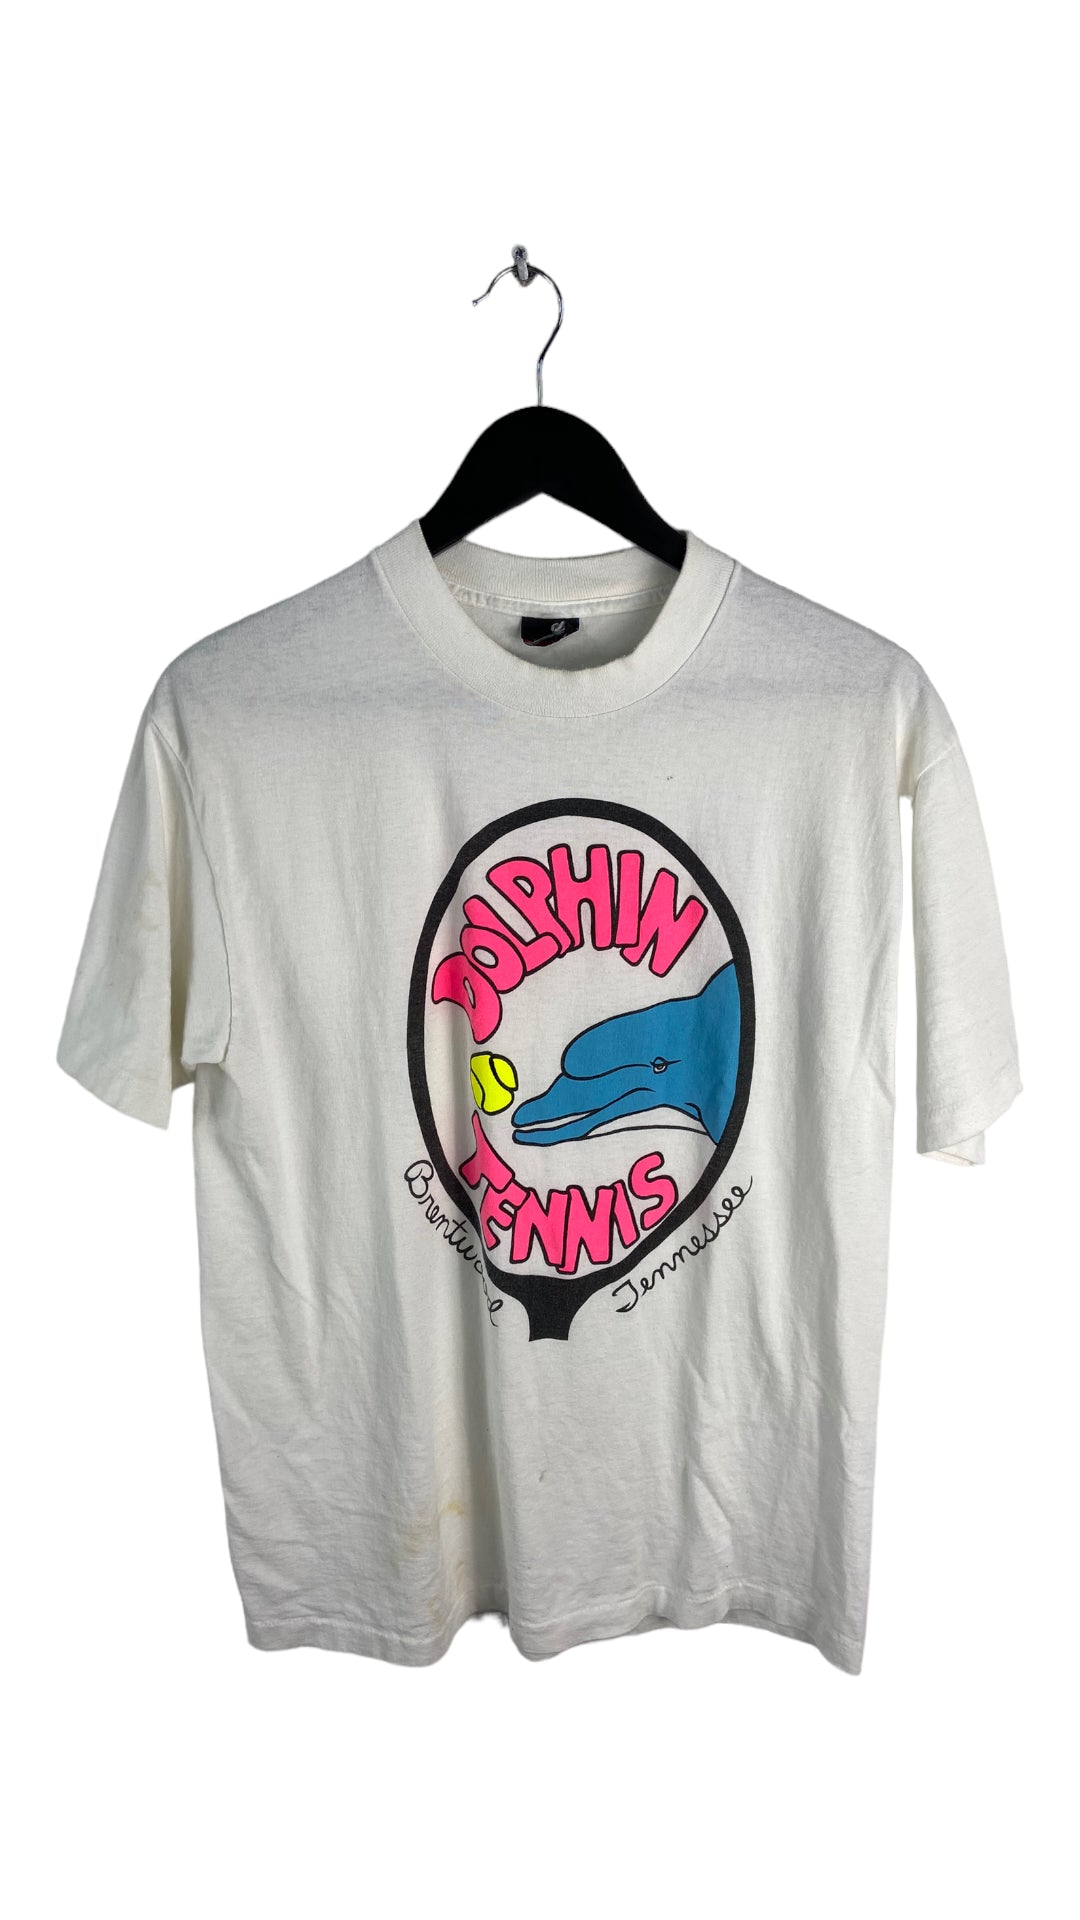 VTG Dolphin Tennis Brentwood Tennessee Tee Sz M